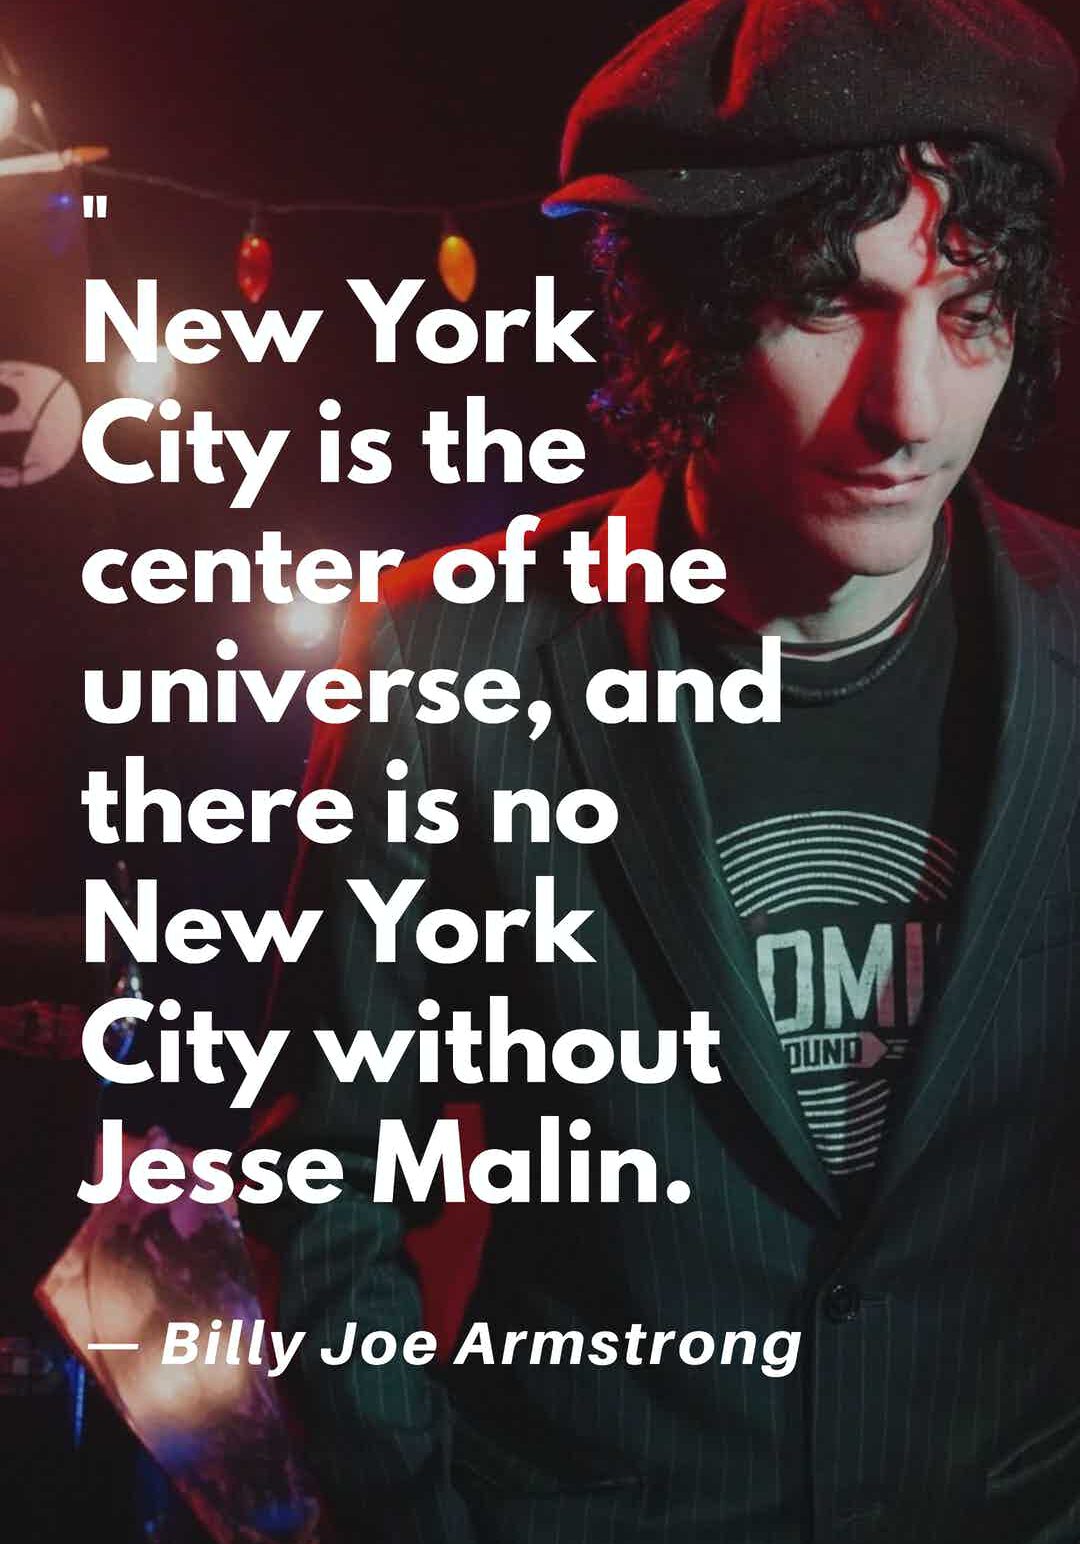 there is no new york city without jesse malin